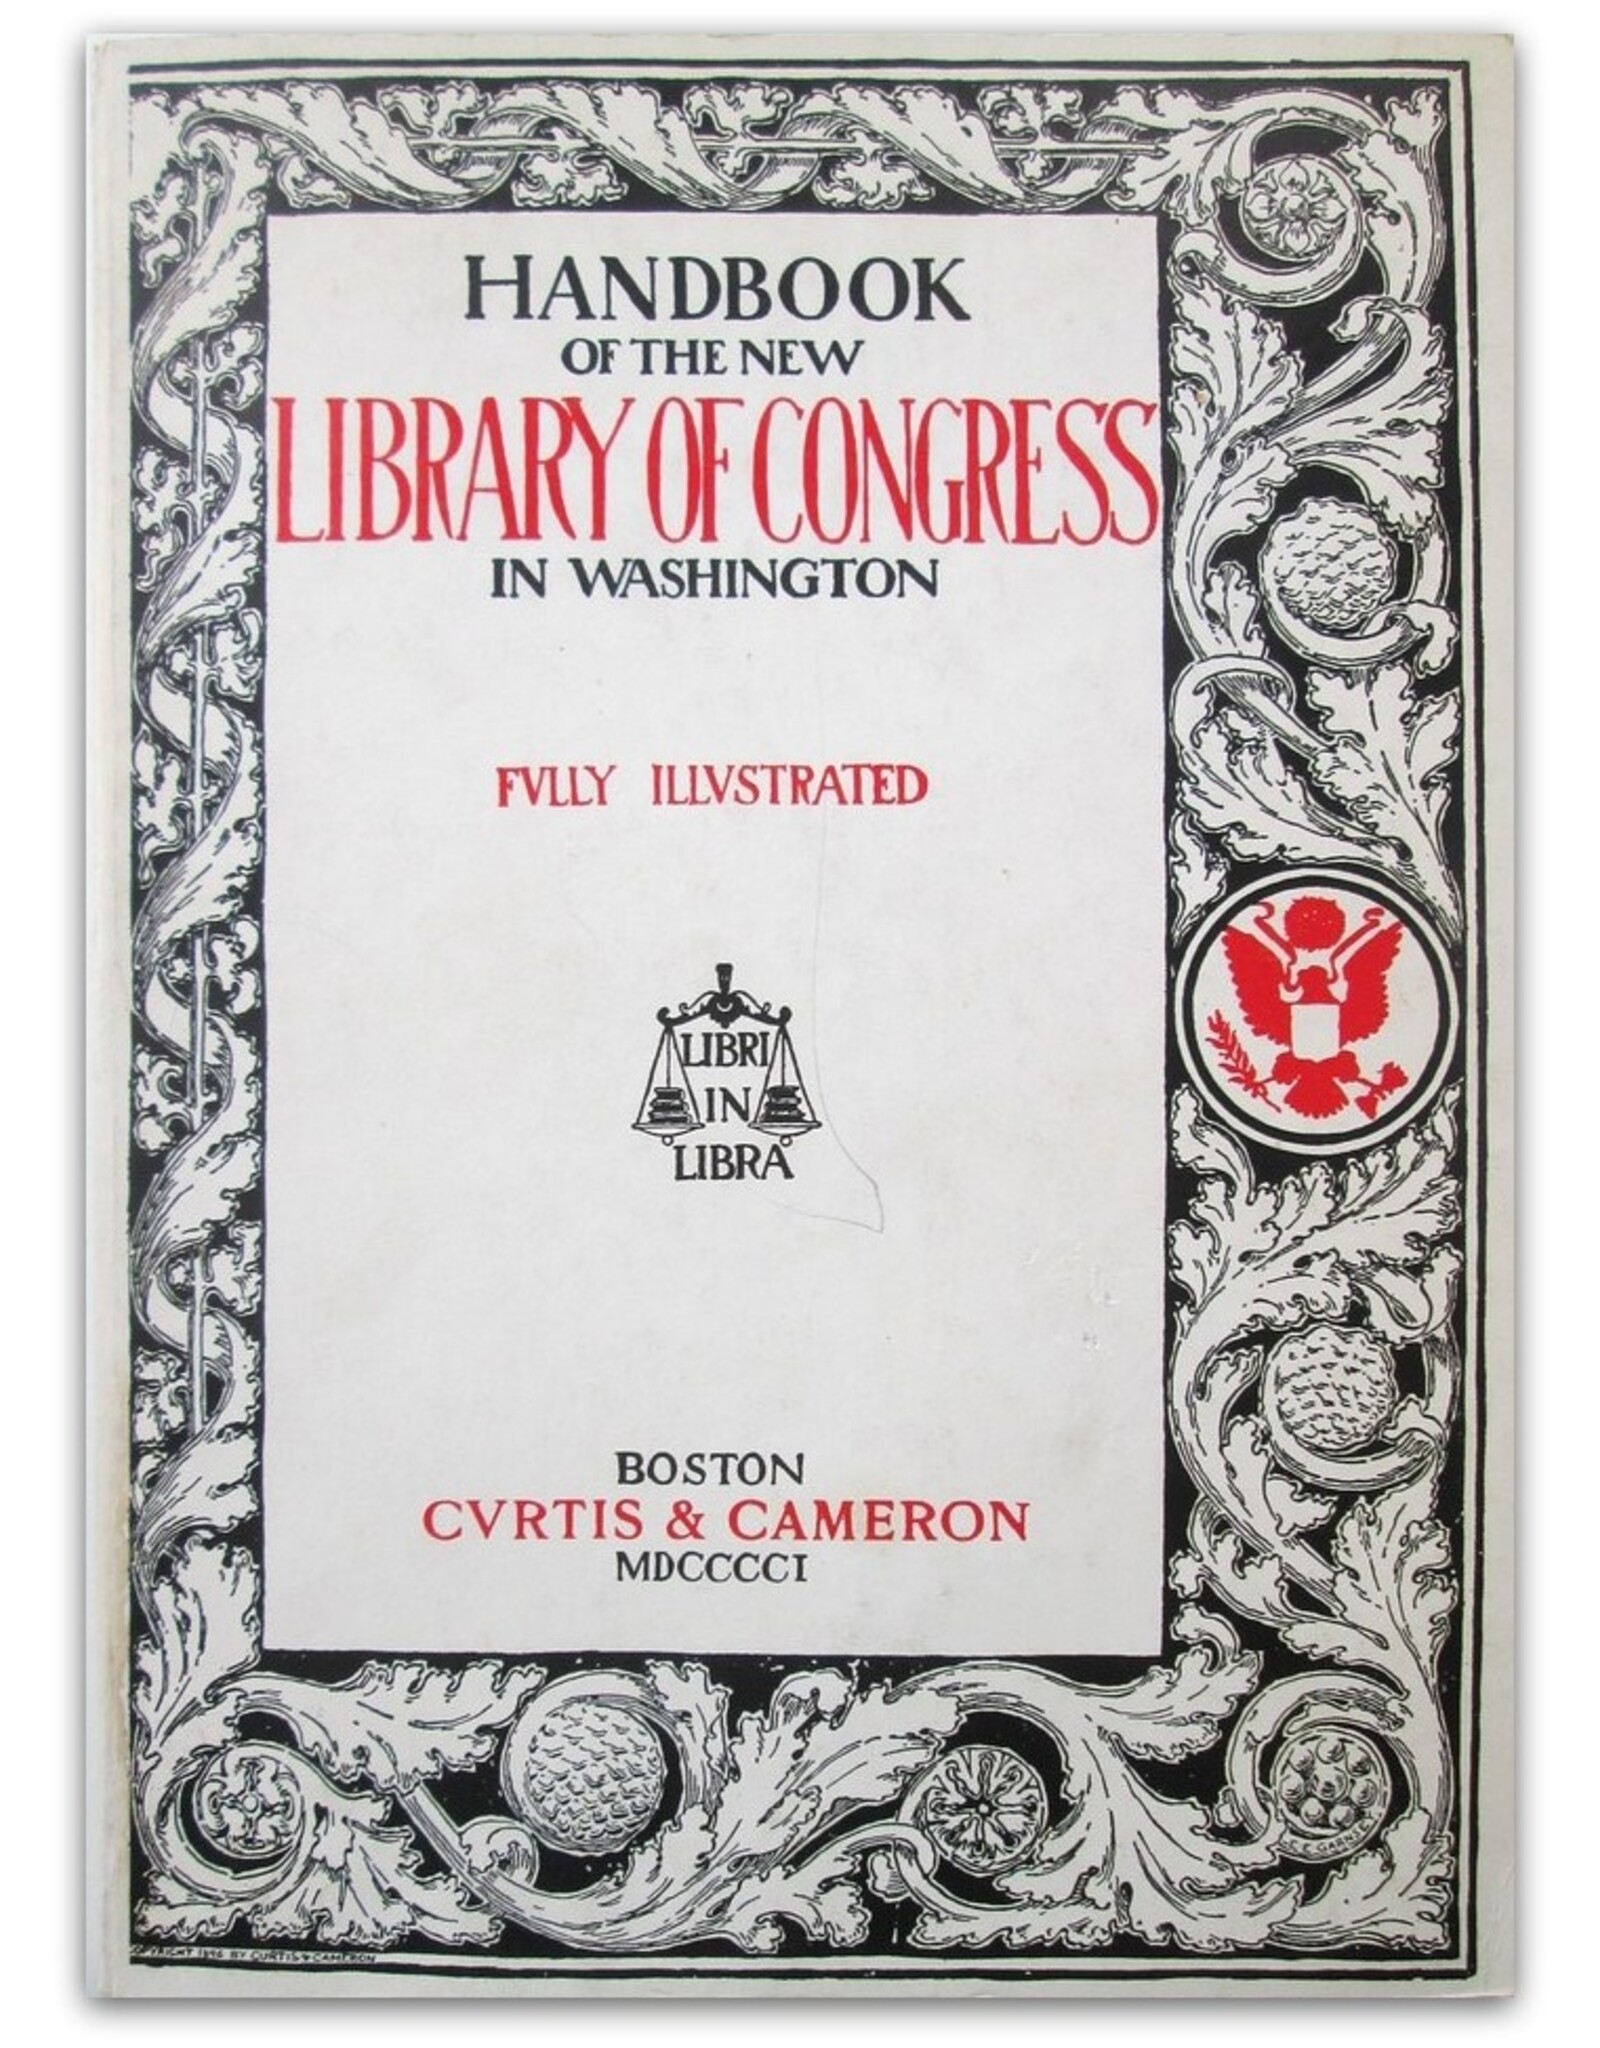 Herbert Small - Handbook of the New Library of Congress in Washington. Fully Illustrated